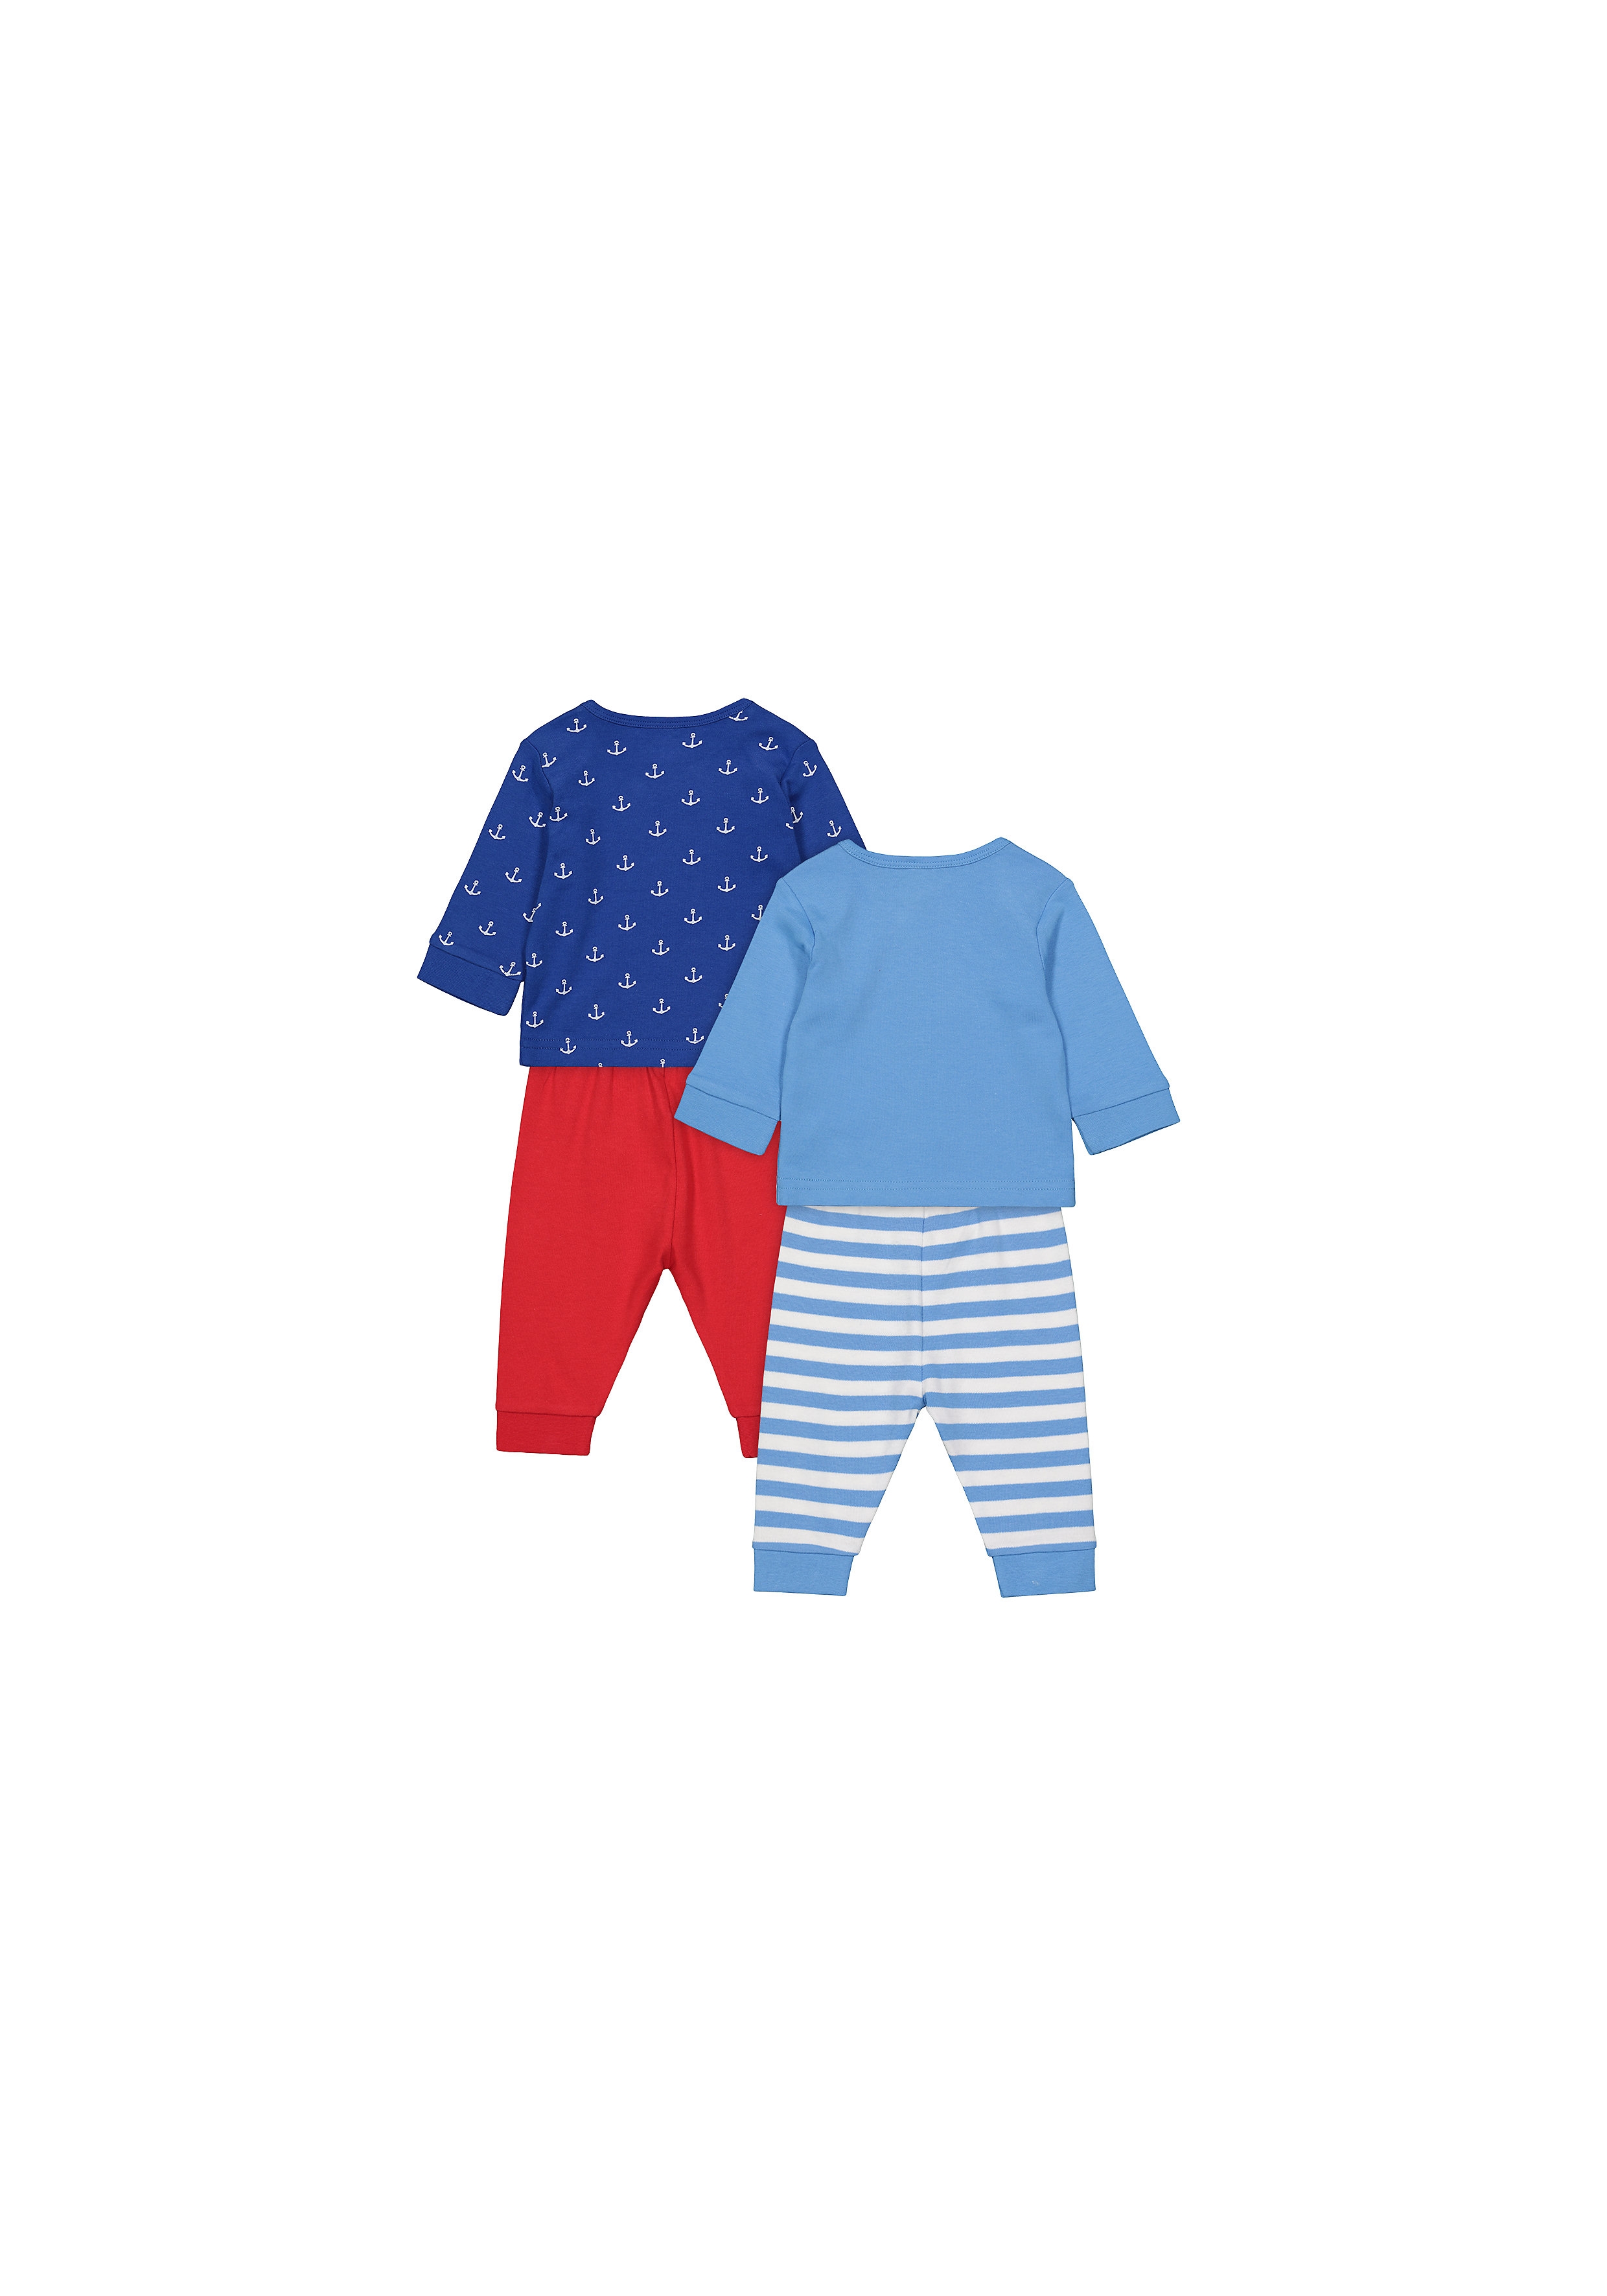 Boys Full Sleeves Pyjamas Anchor And Boat Print - Pack Of 2 - Blue Red